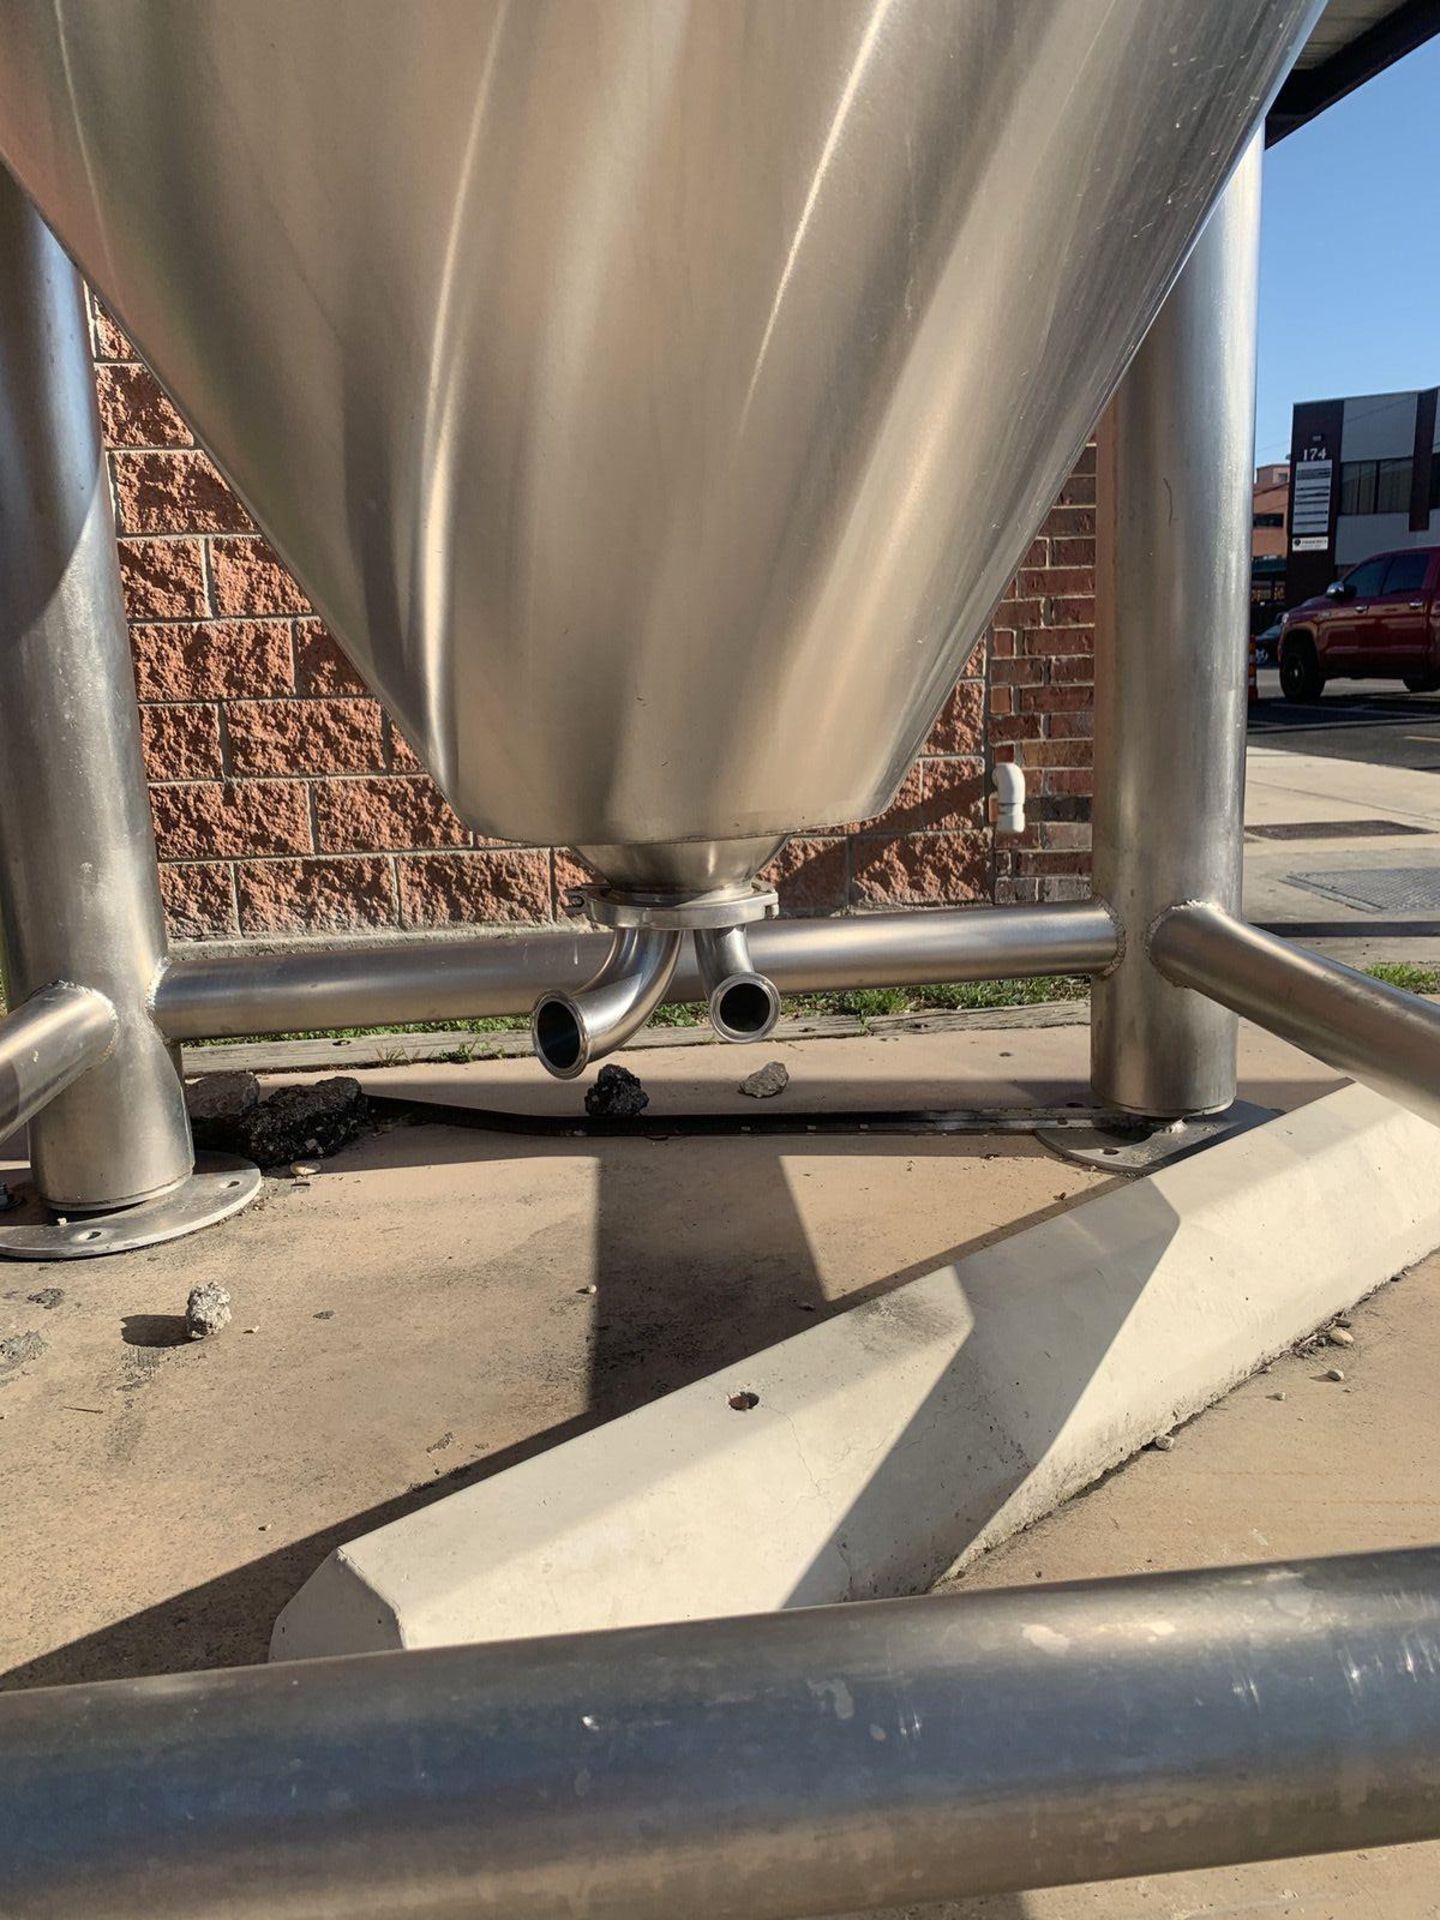 2013 MARKS DESIGN 60 BBL FERMENTER, GLYCOL JACKETED, S/N: 13114 (LOC: TEXAS) | Rig Fee: 900 - Image 3 of 9